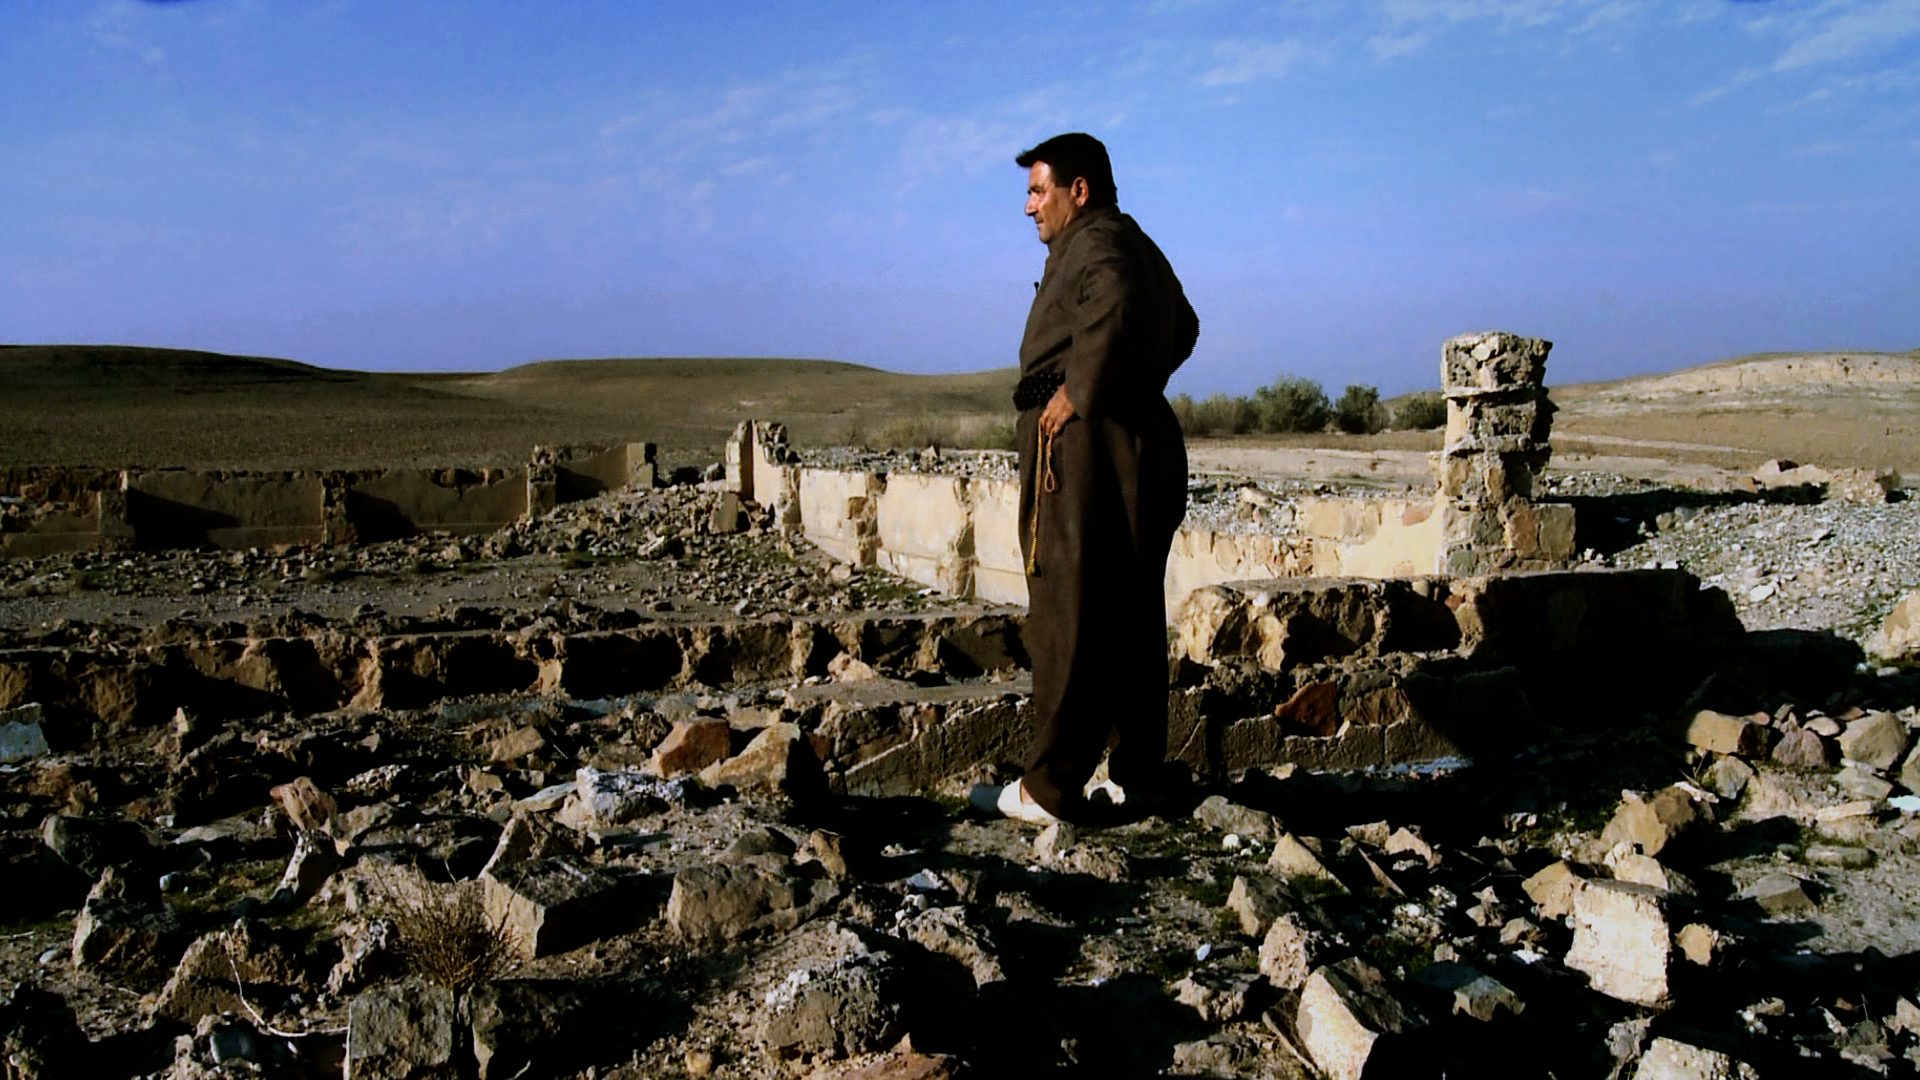 OSMAN ALI AZIZ shows us the remains of his nephew Teimour's home. Teimour was a young Kurdish boy from Kulajo village who survived a mass execution in 1988 aged 11. He was rescued in the southern deserts by a bedouin family but most of his family died during Anfal.